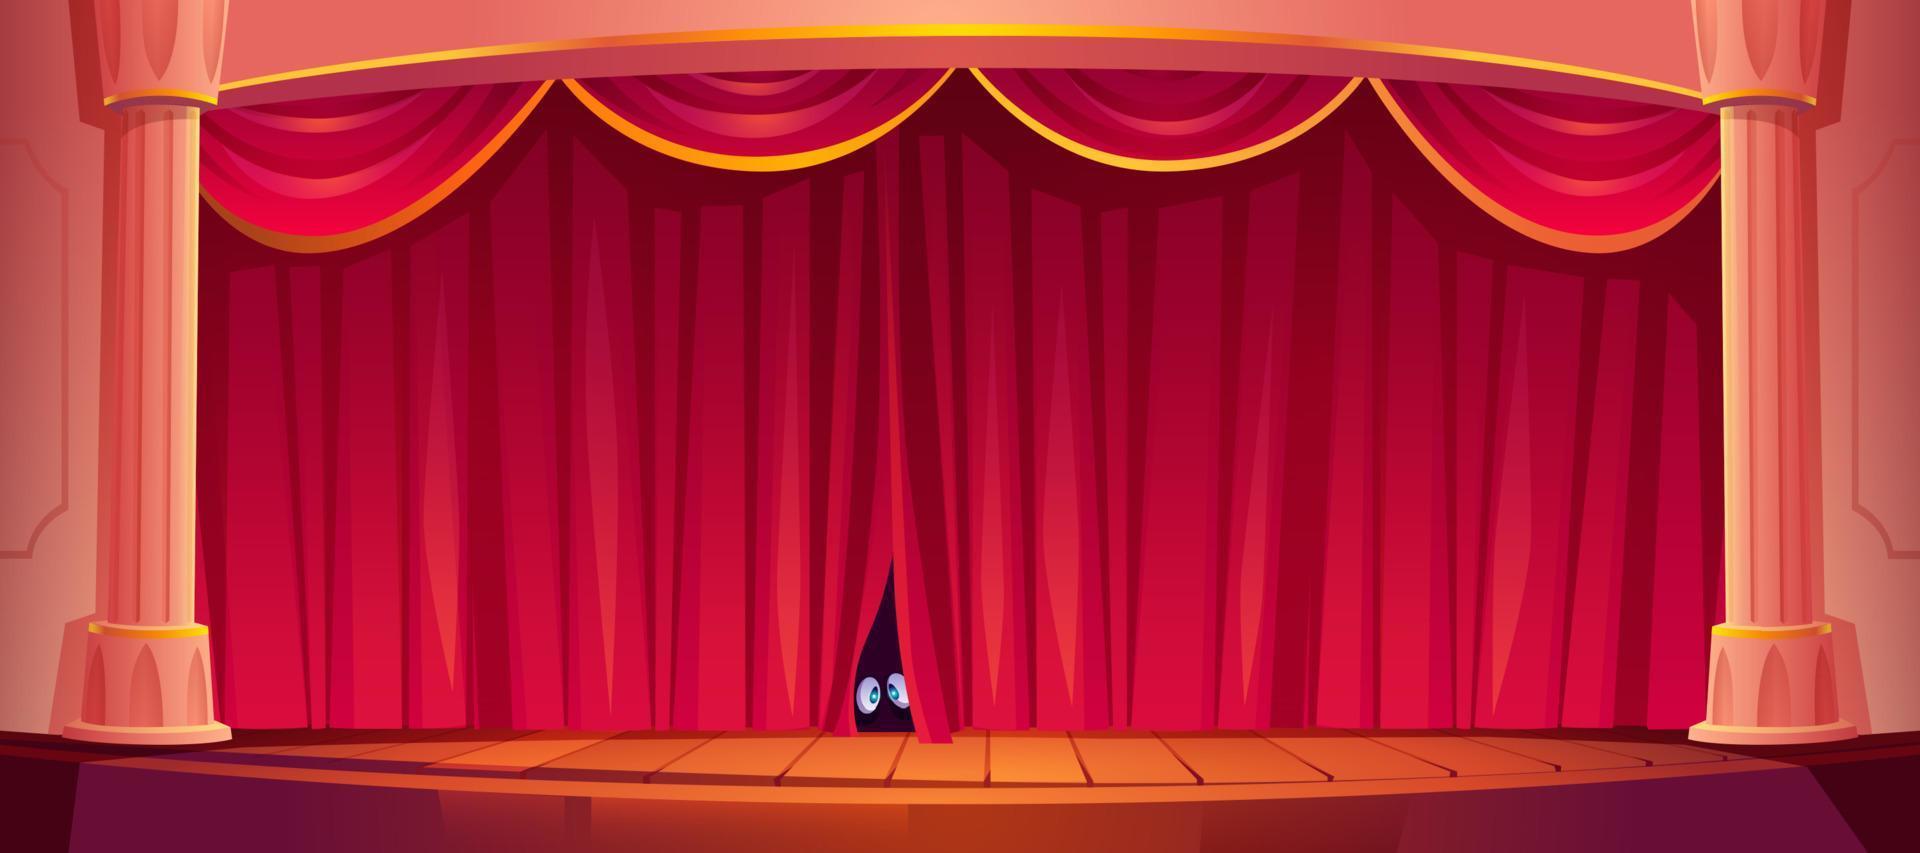 Eyes look out red curtain on theater stage, vector